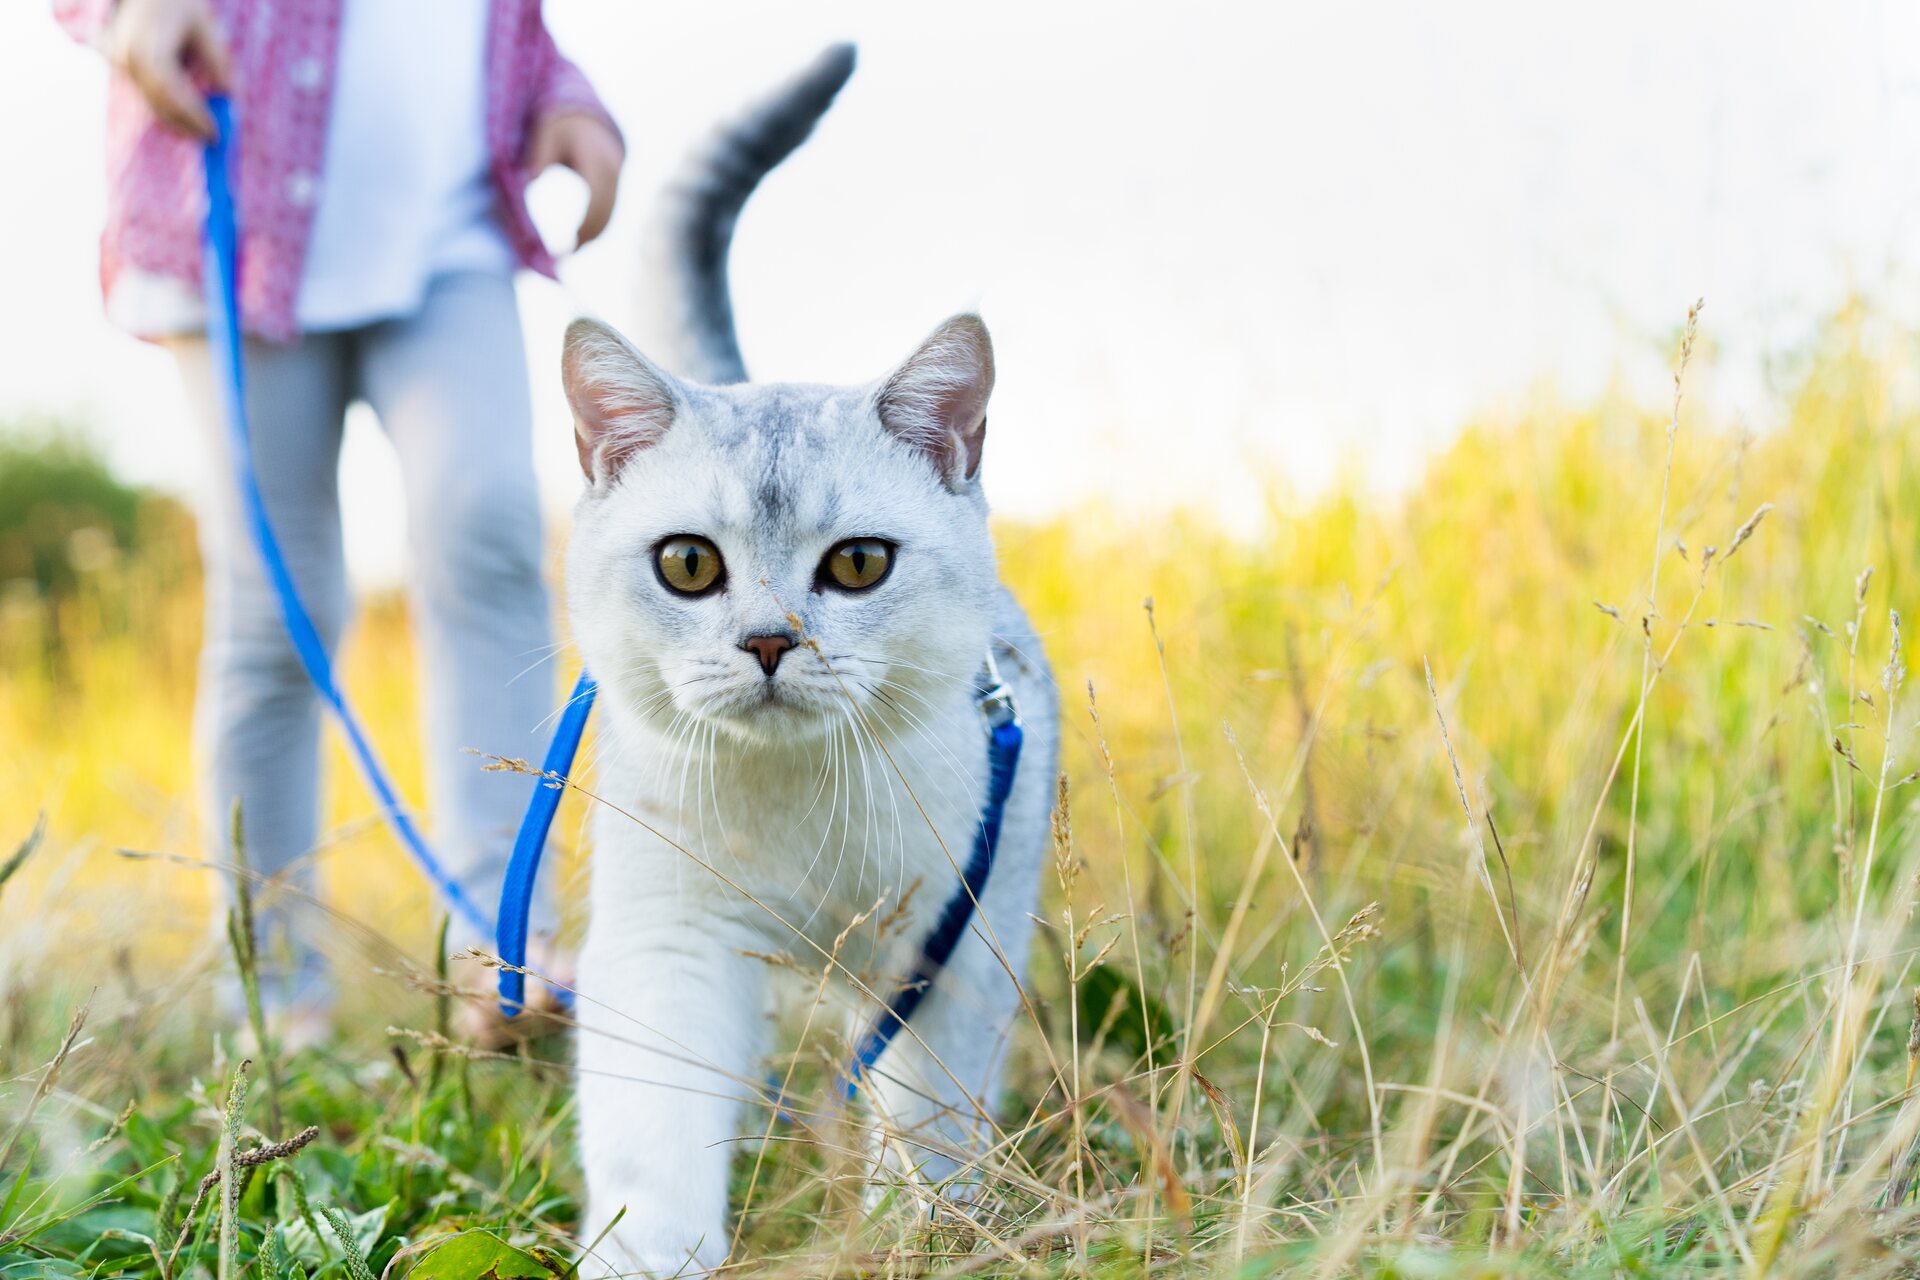 A cat walking outdoors on a leash